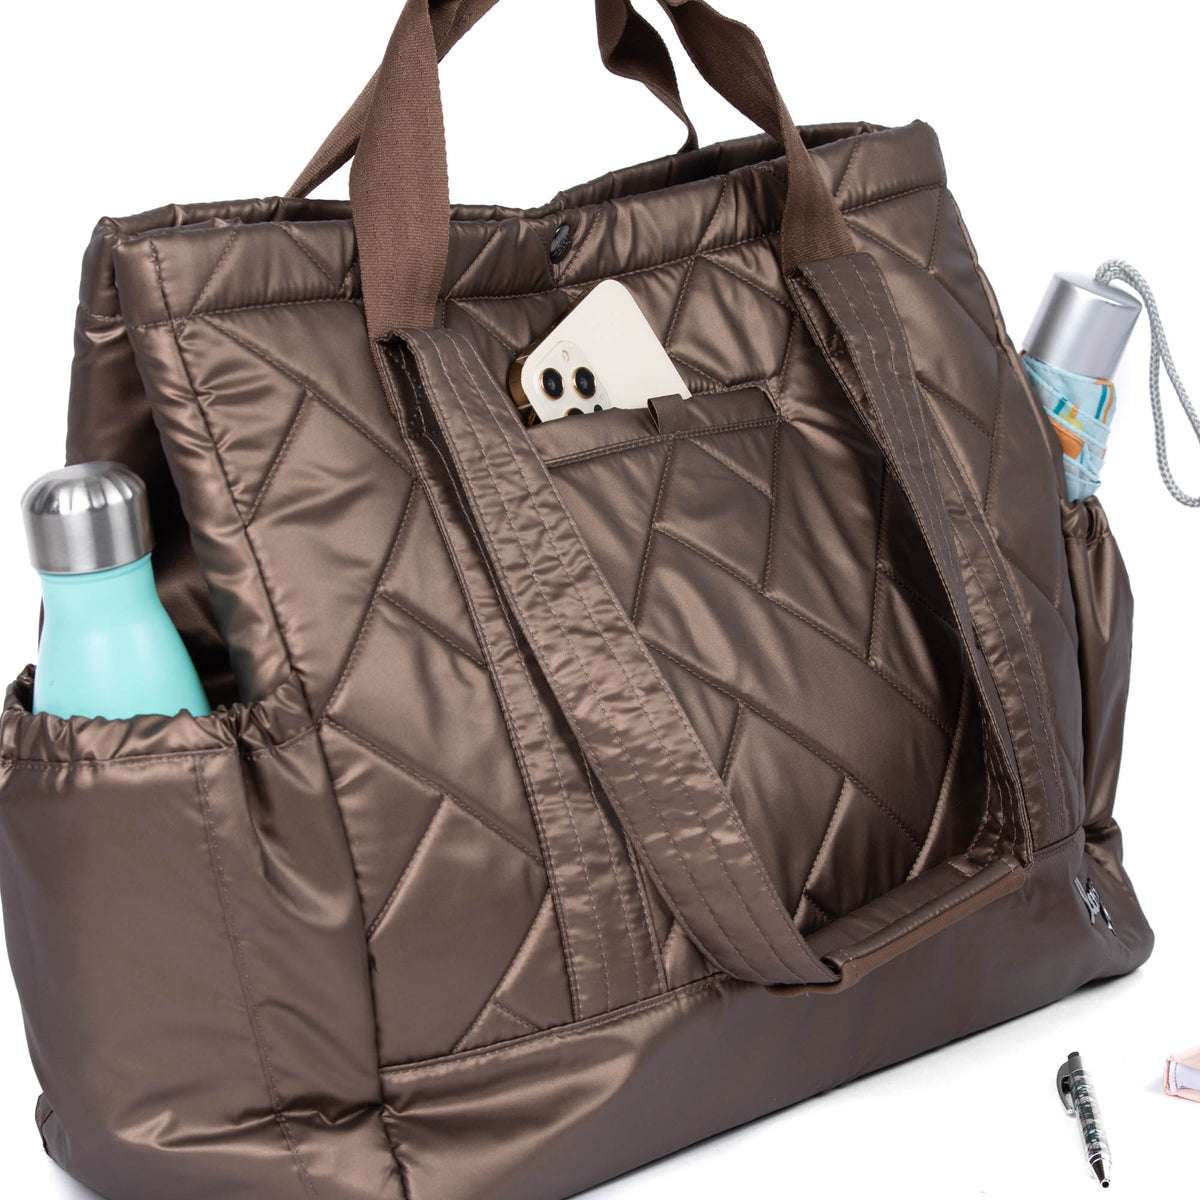 Yacht Carry-All Tote